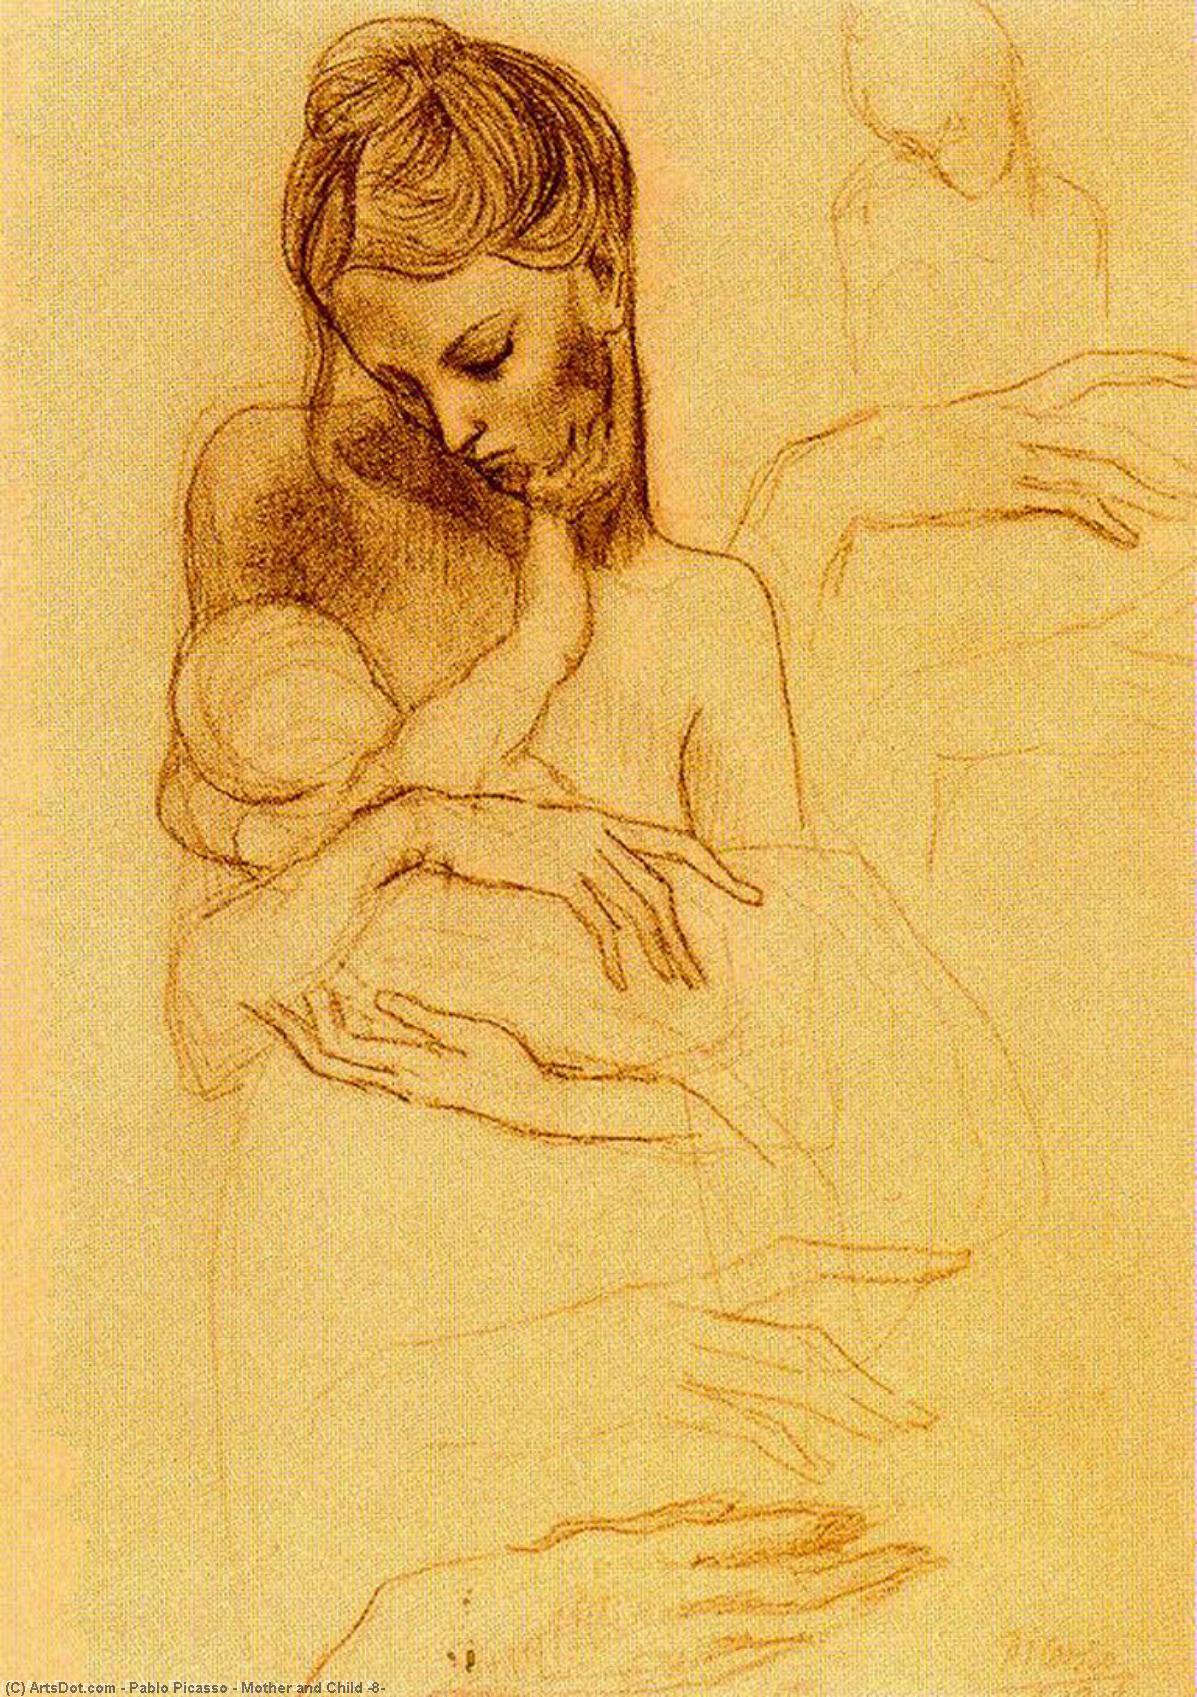 WikiOO.org - 백과 사전 - 회화, 삽화 Pablo Picasso - Mother and Child (8)